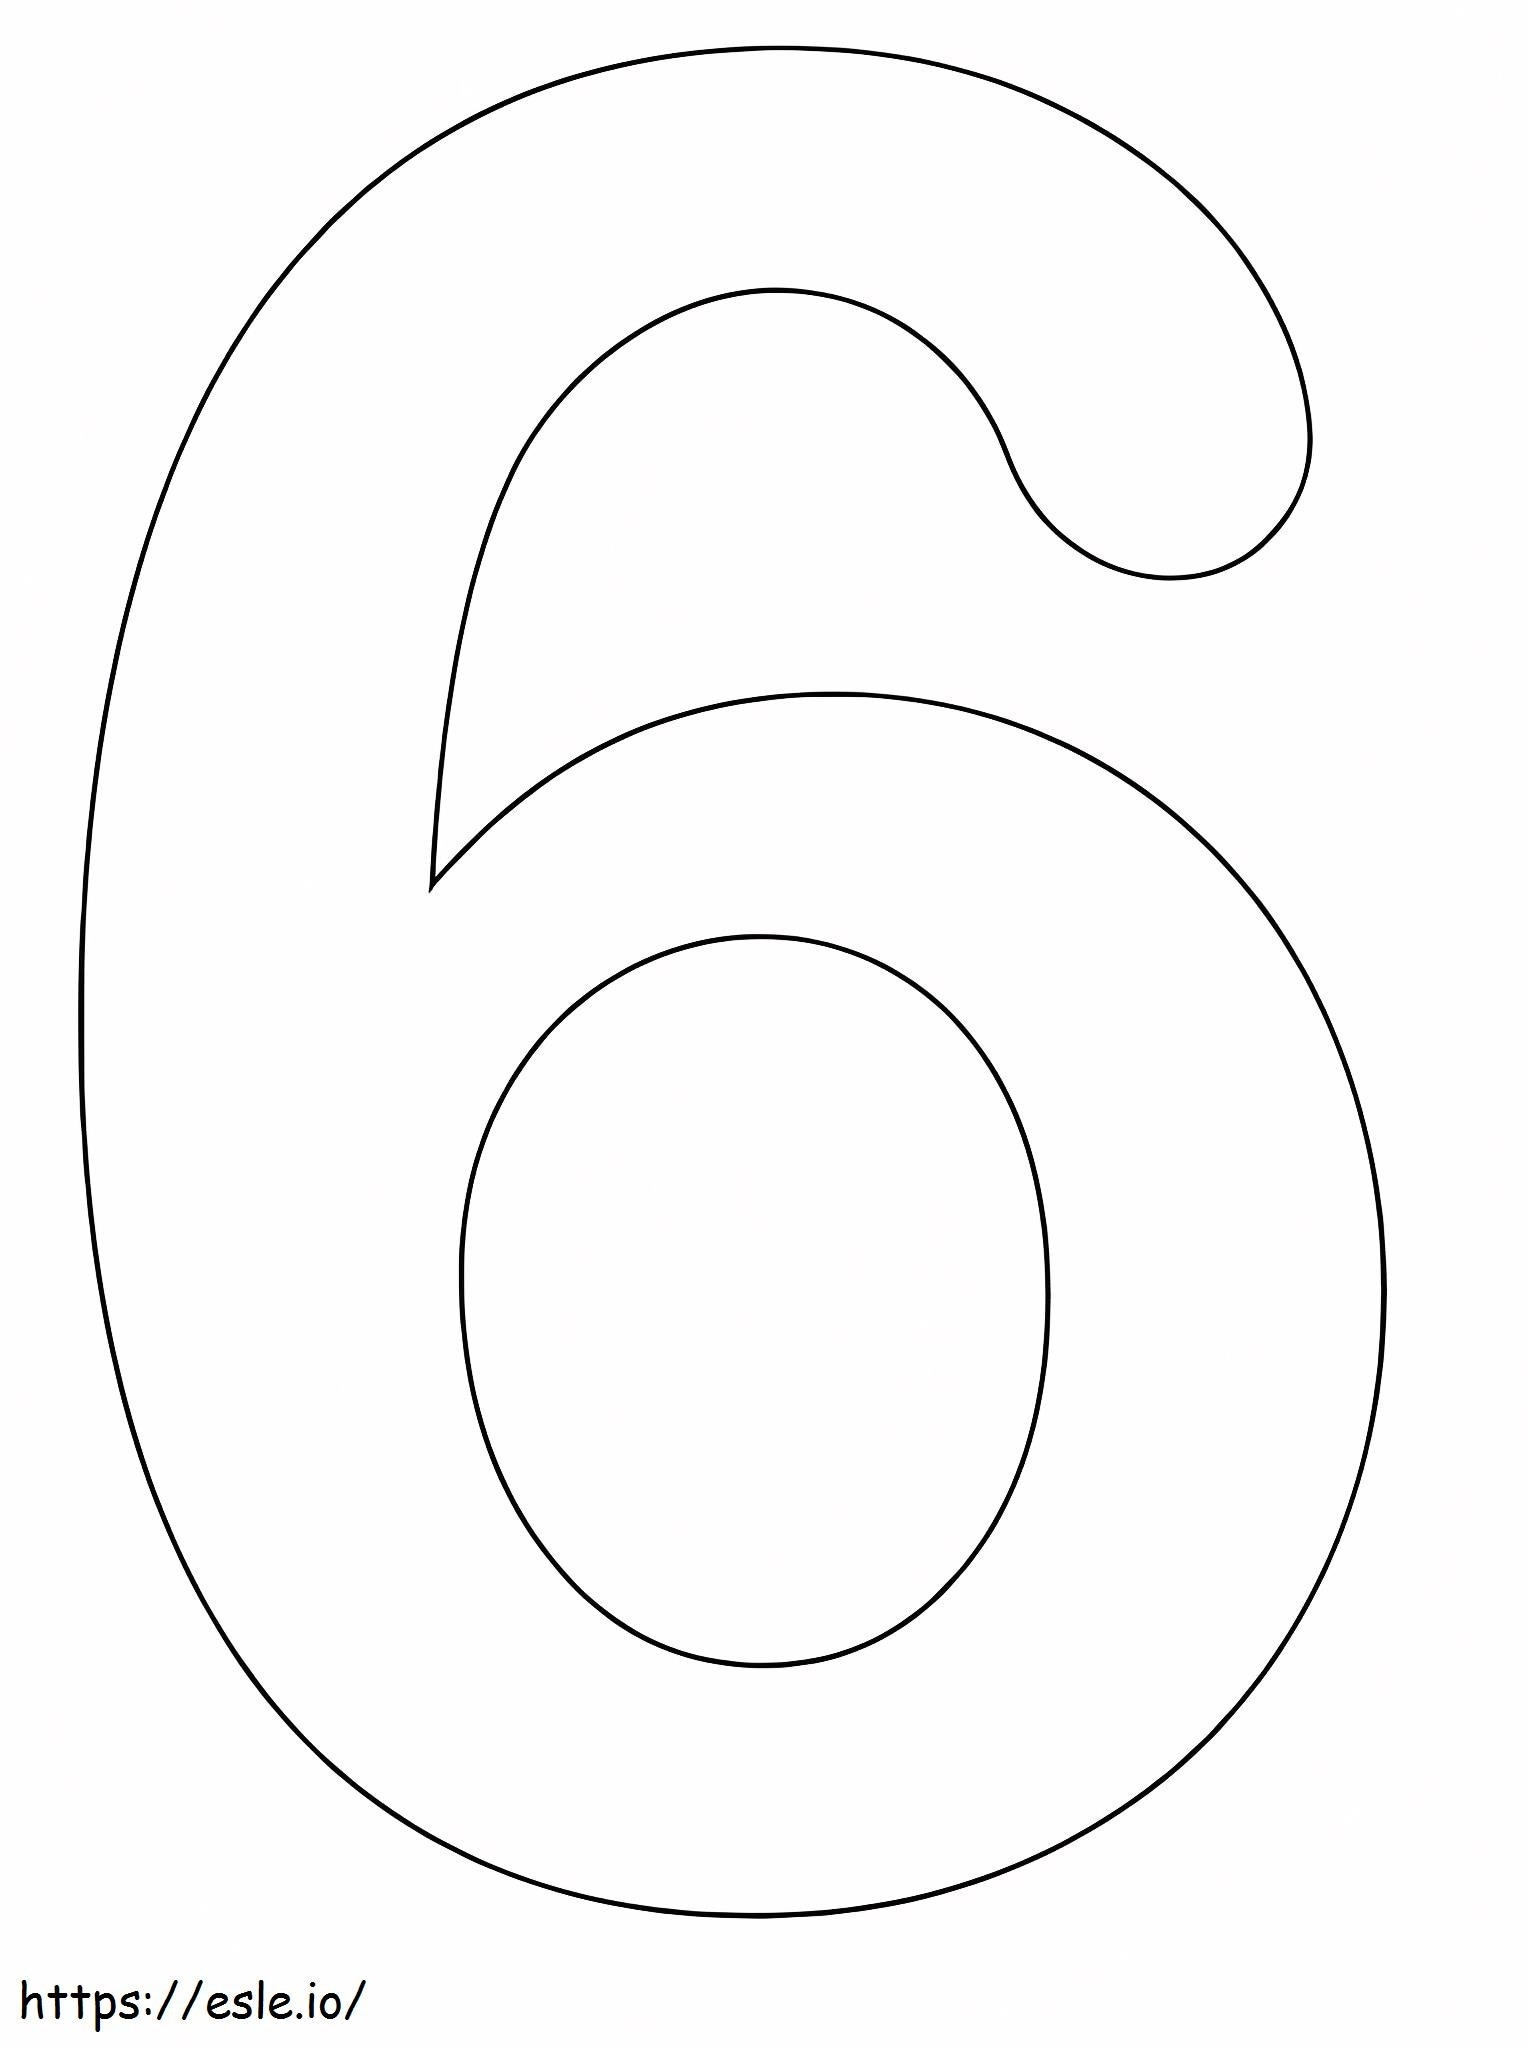 Normal Number Six coloring page